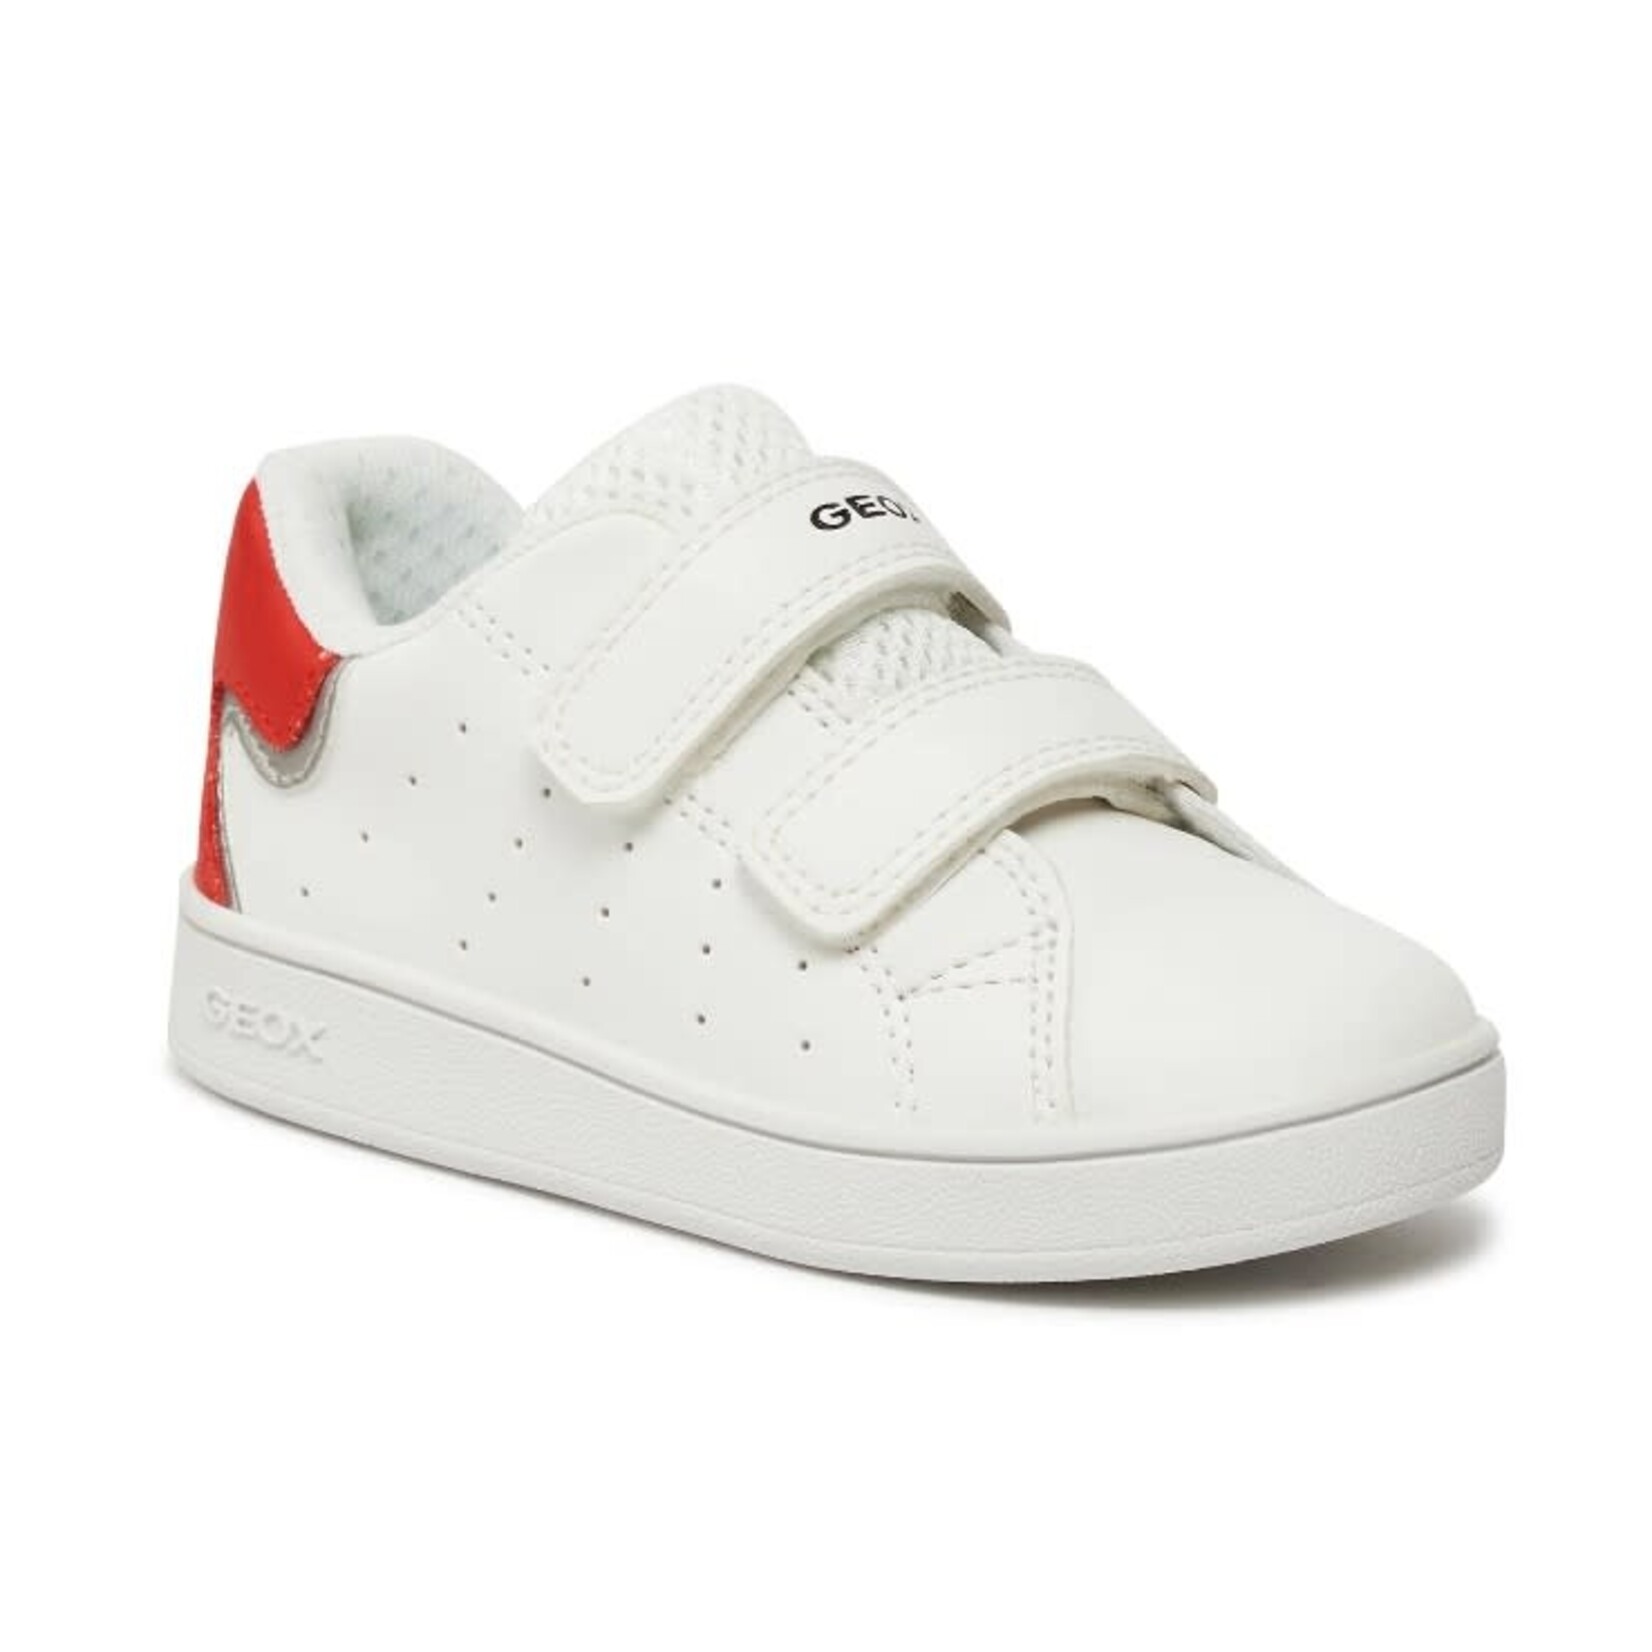 Geox GEOX - White and red synthetic leather shoes 'Eclyper - White/red'